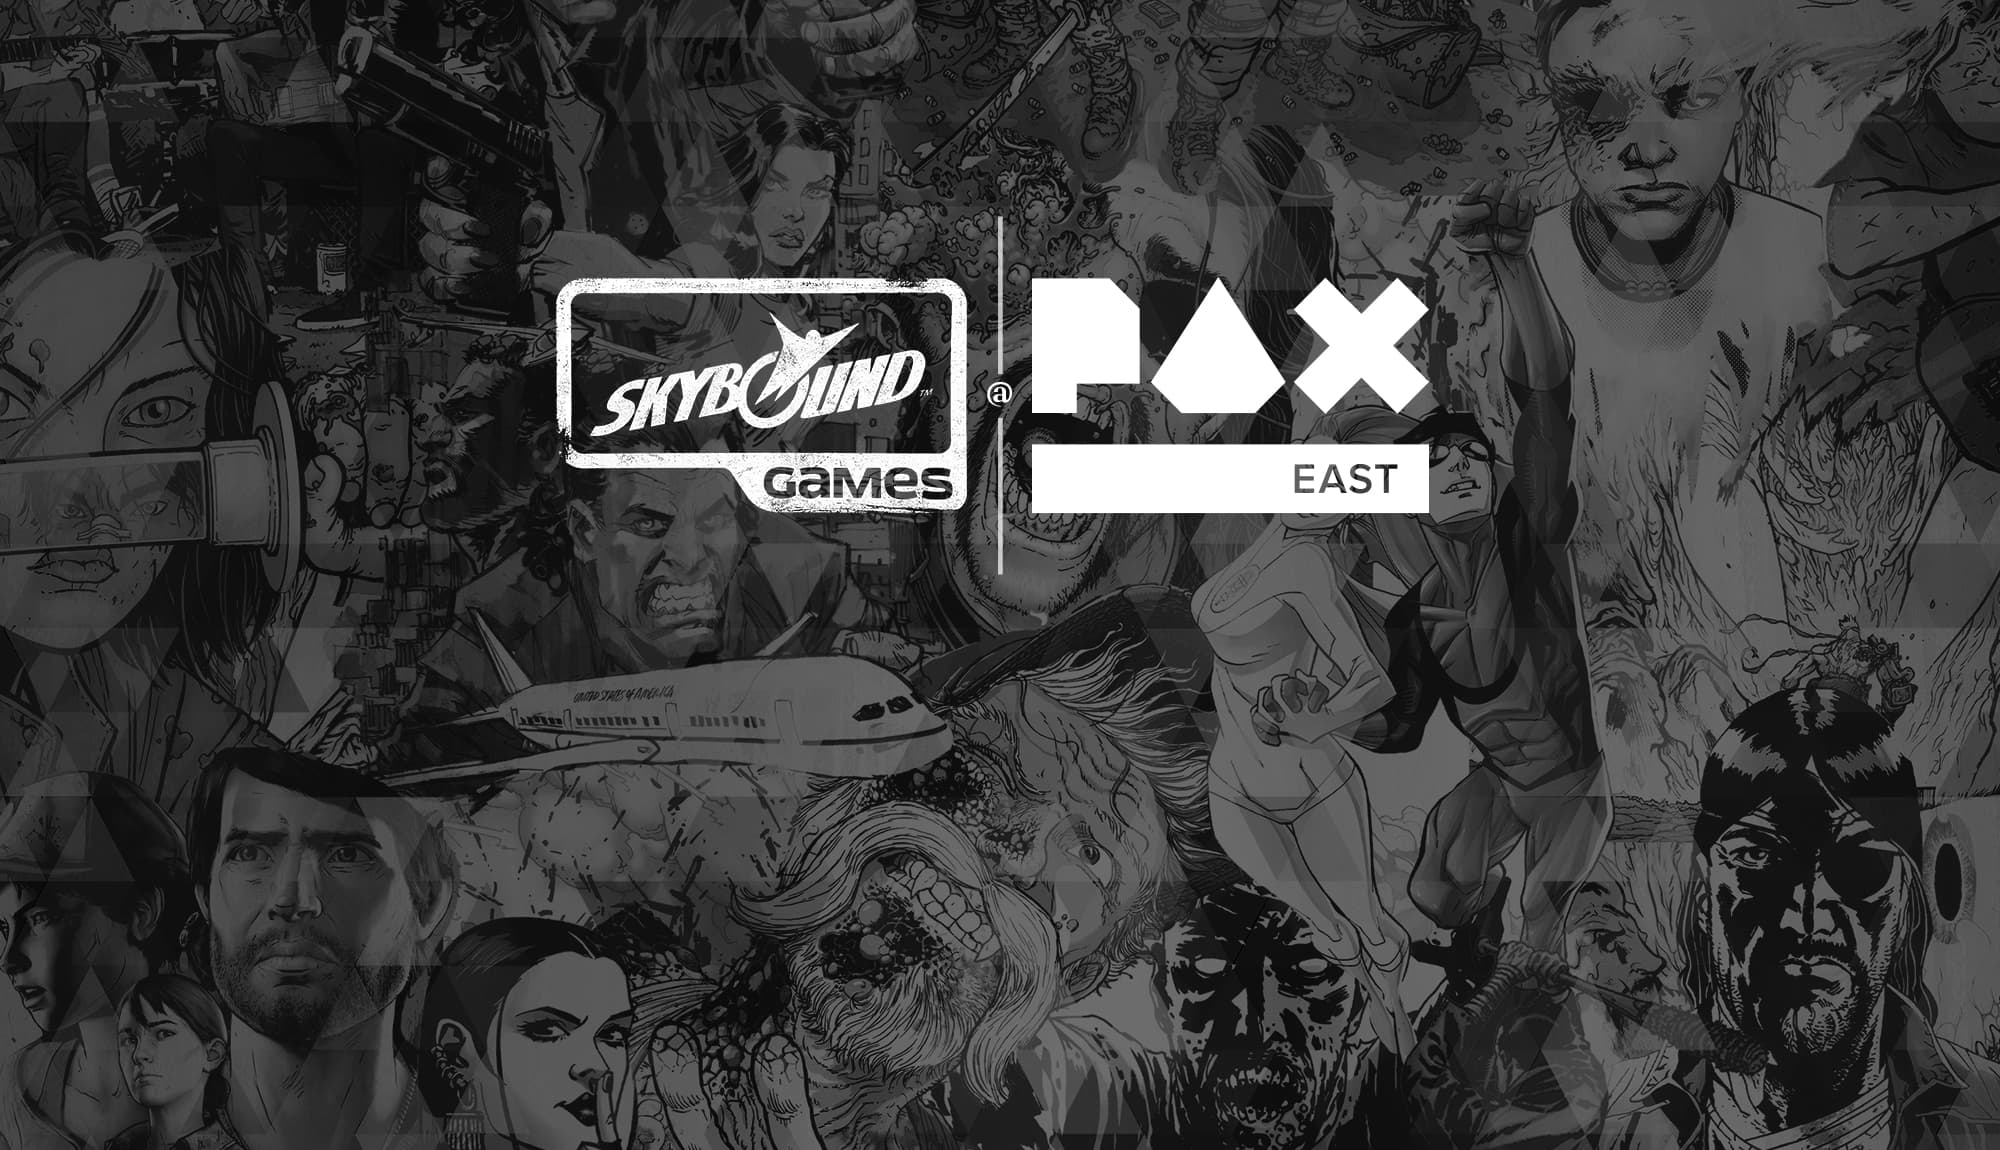 Skybound Games at Pax East – Live Coverage